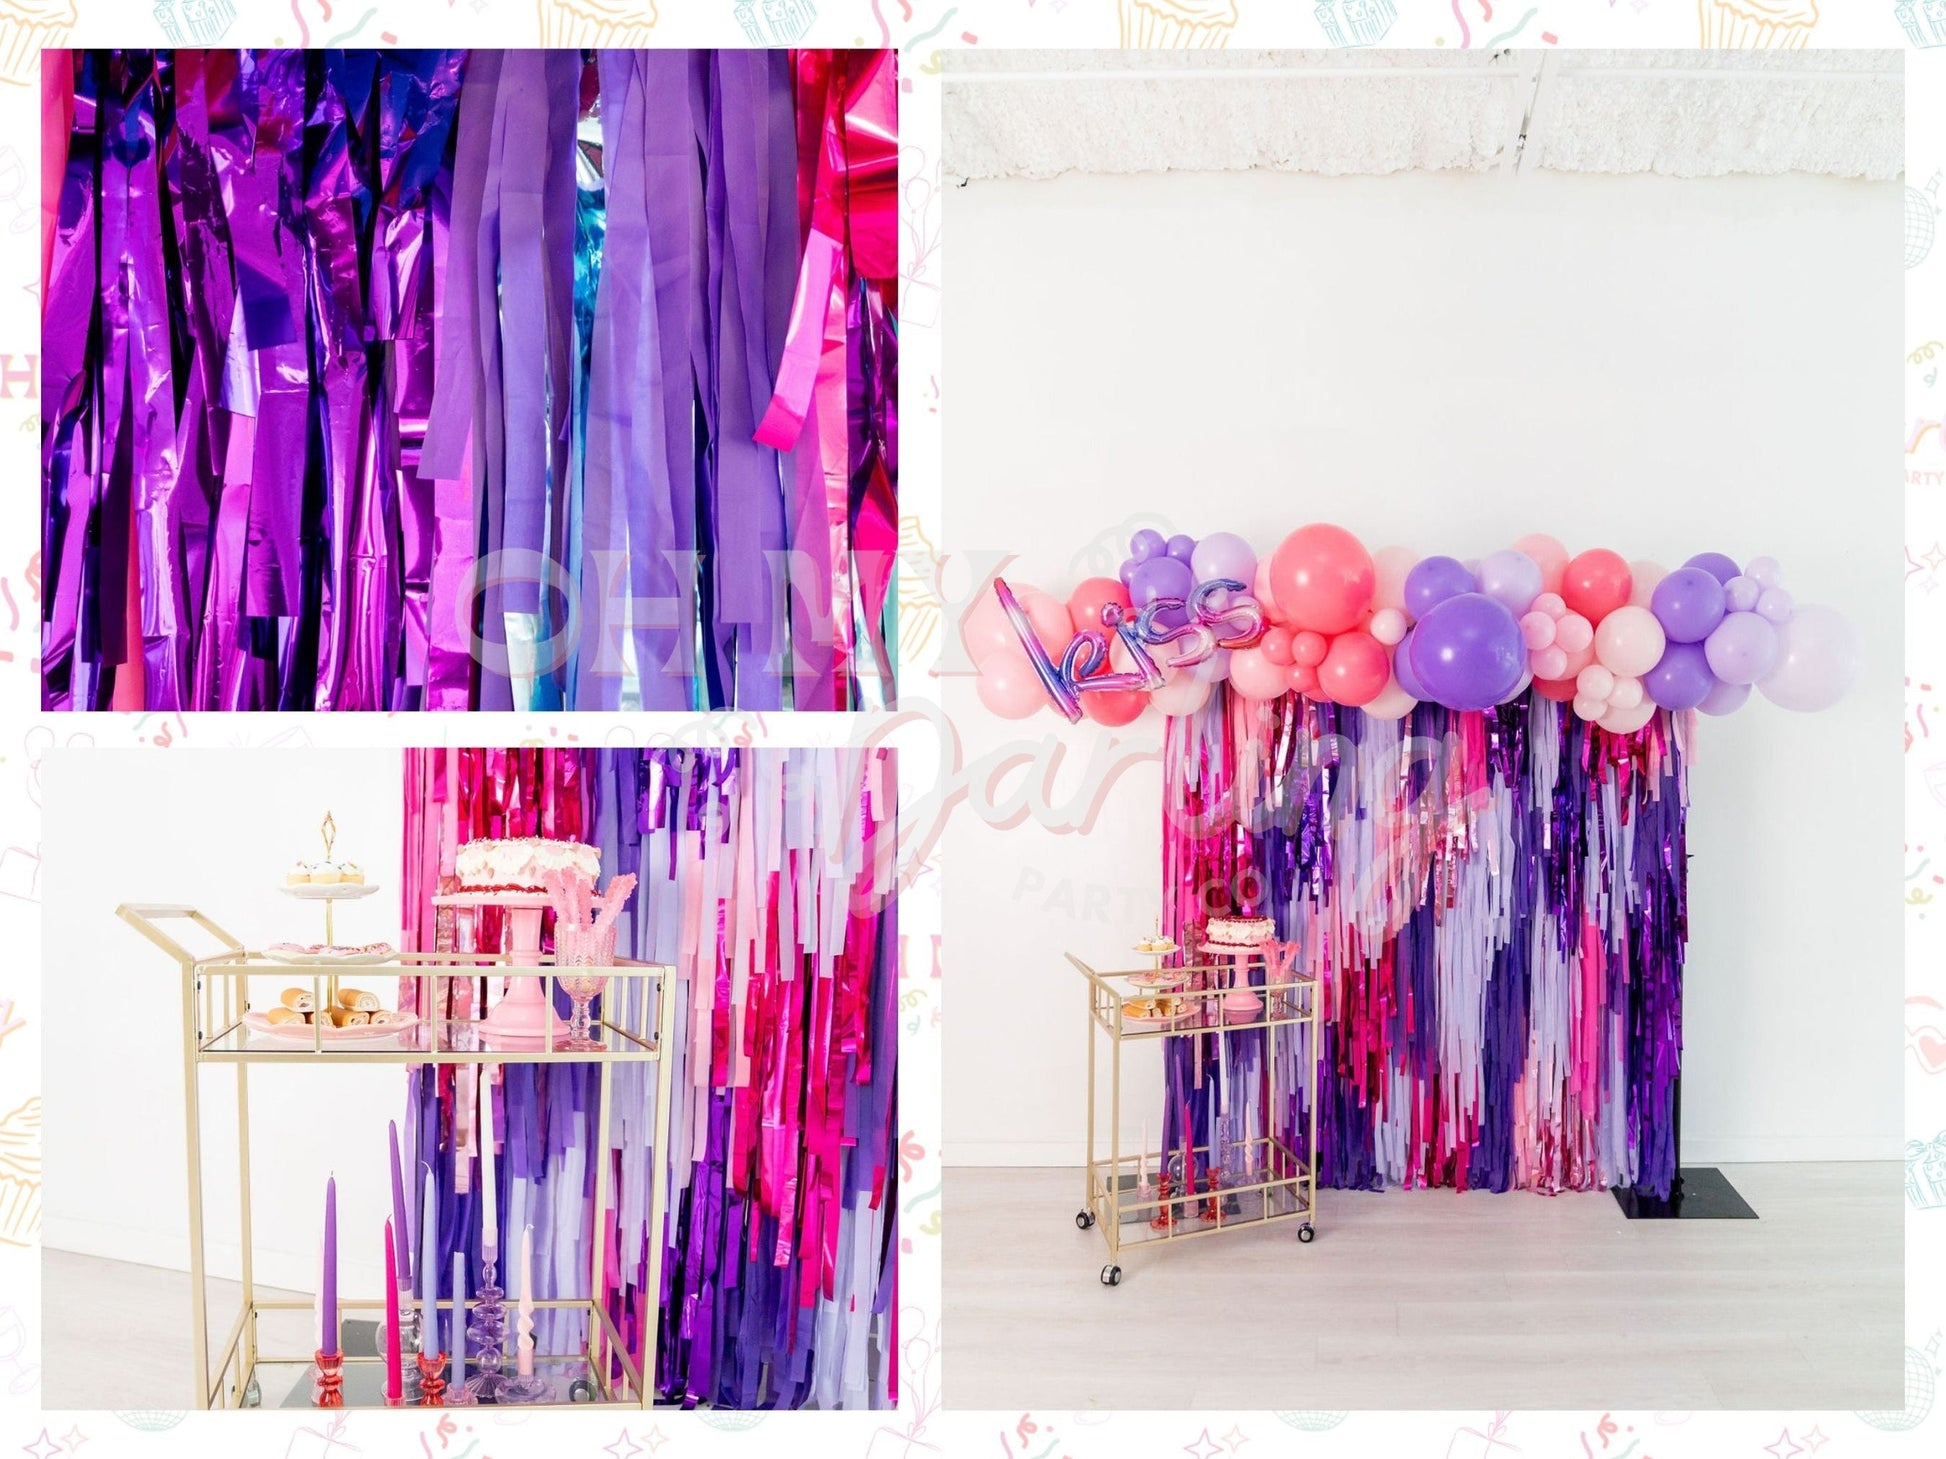 Iris & Lilac Fringe Backdrop-Fringe Backdrop-Party Decor-Oh My Darling Party Co-Oh My Darling Party Co-baby shower, backdrops for party, balloon garlands, be my valentine, birthday decorations, bridal, bridal party, bridal shower, bridal shower decor, butterfly party, candy pink, christmas 22, dark purple, default, first birthday, fringe backdrop, fringe garland, Fringe Streamers, girl baby shower, girl birthday, girl space party, metallic purple, OMDPC, outerspace, party backdrops, party decor, pink, pink 